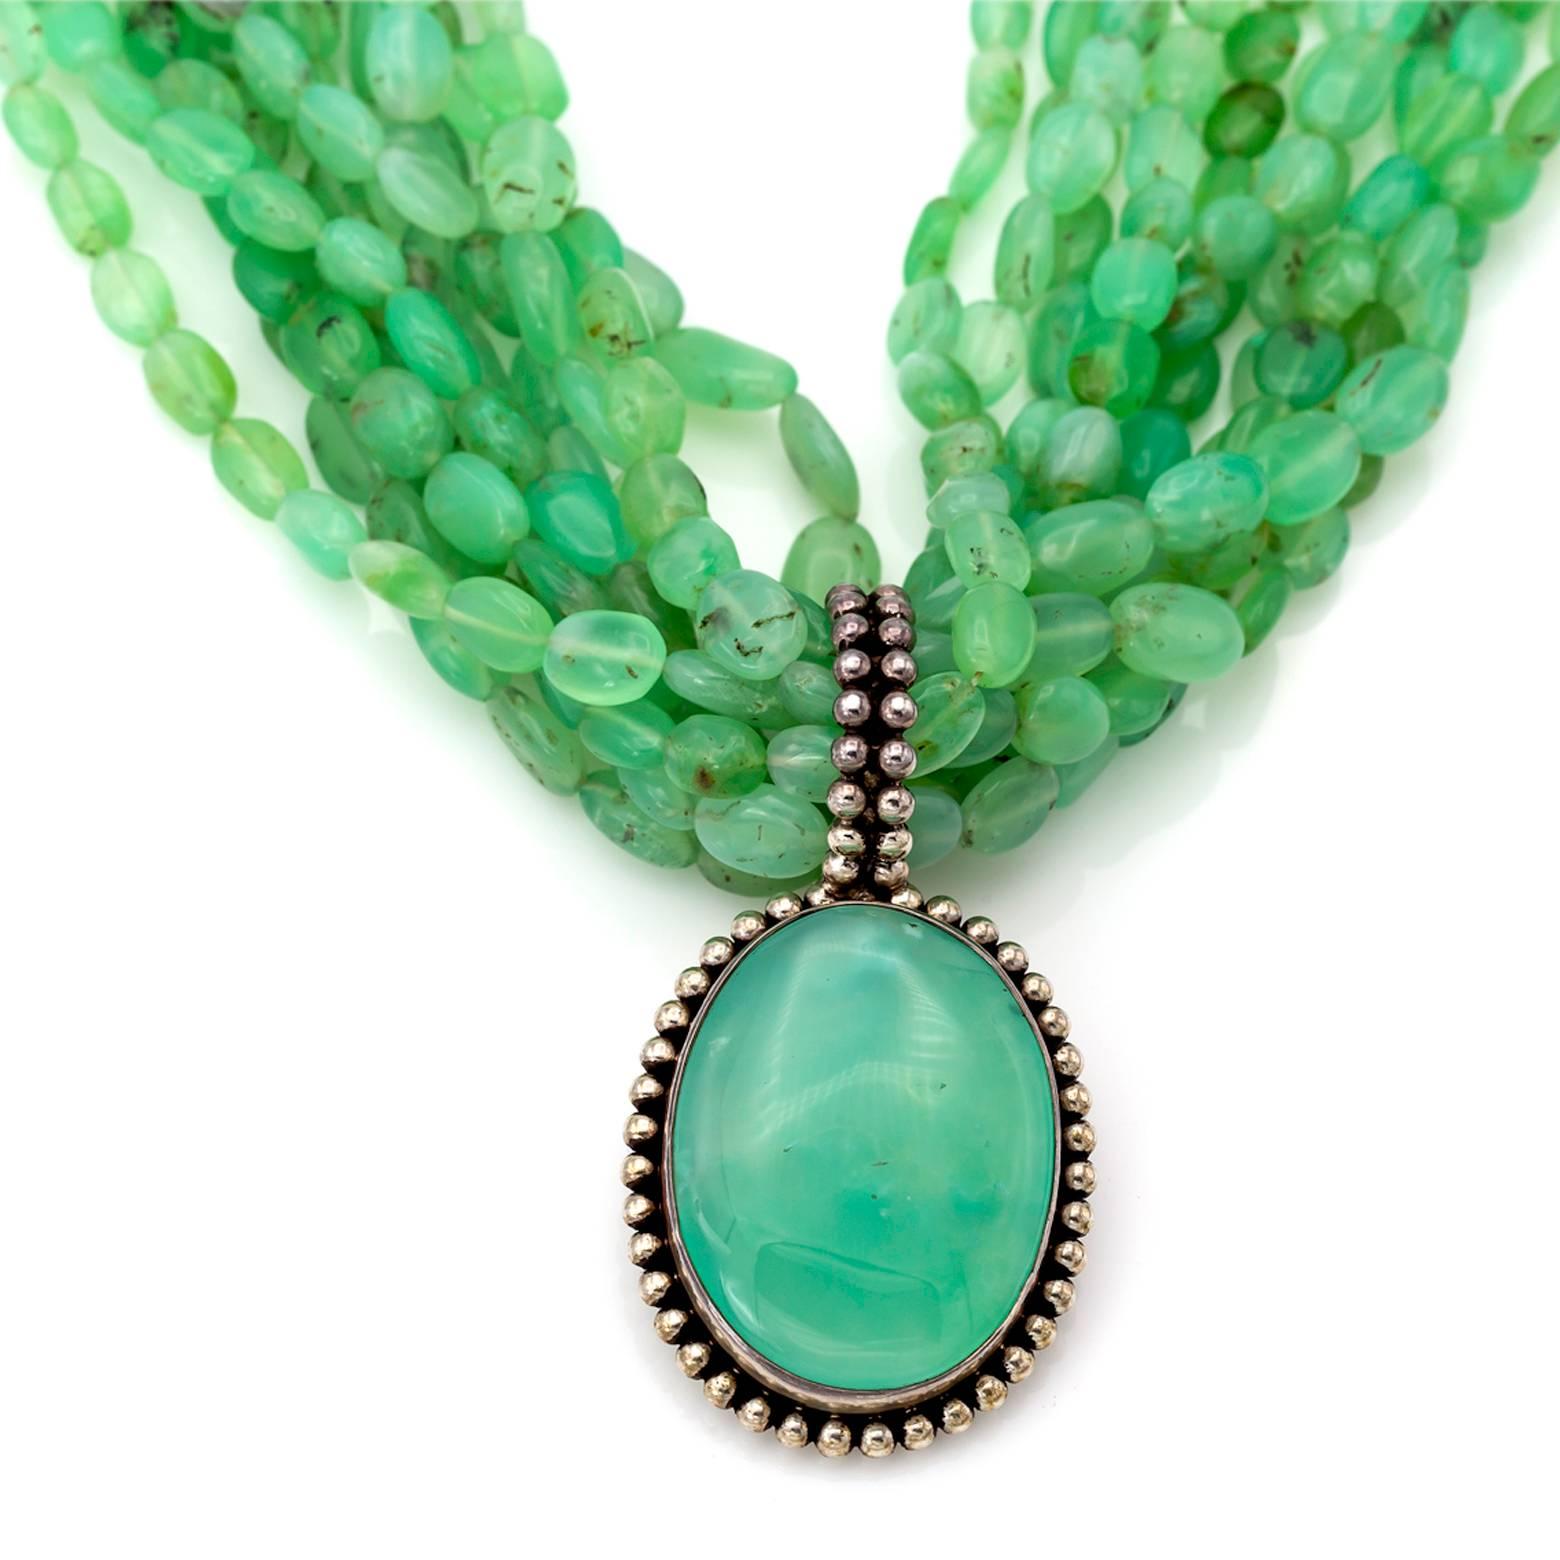 Multi-Strand Chrysoprase Necklace with Large Pendant in Sterling Silver 1